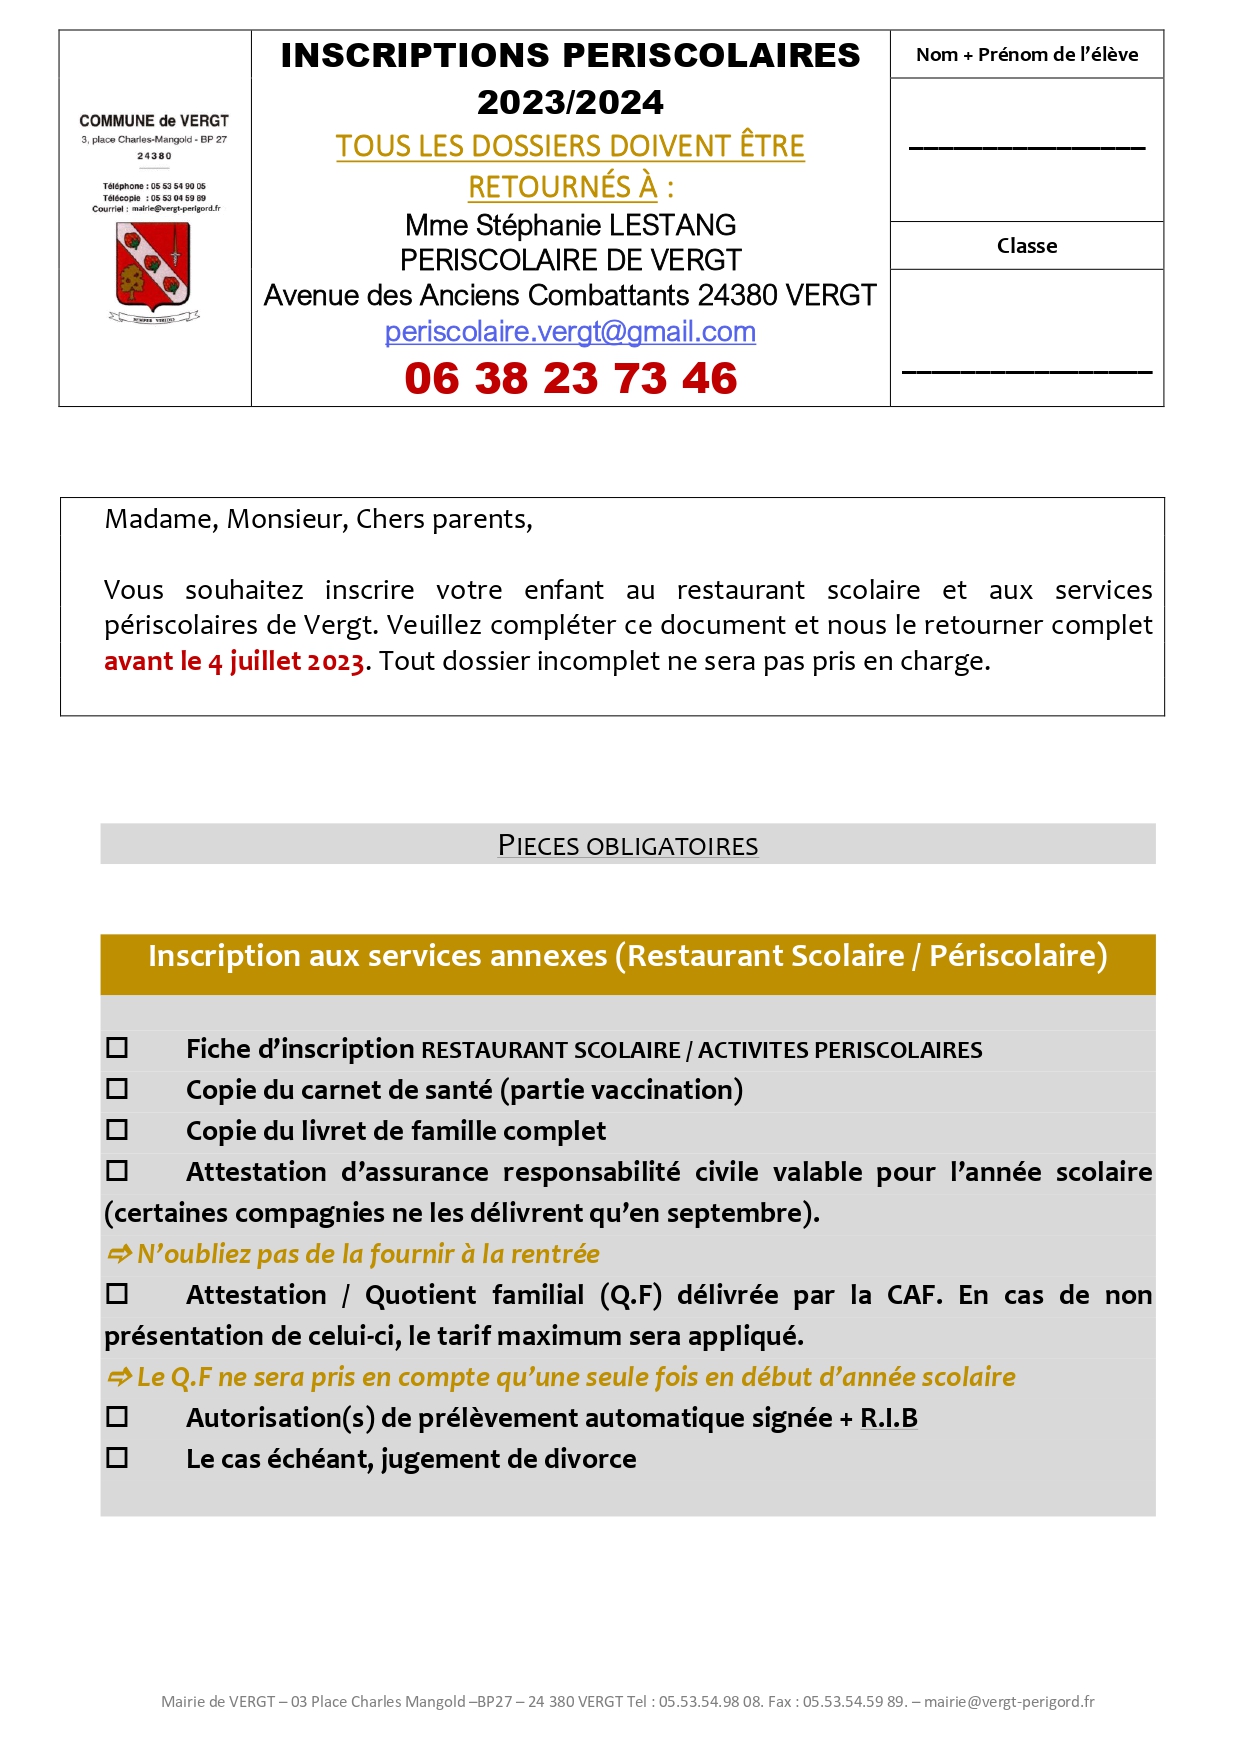 Dossier d_inscriptions CANTINE _ PERI VERGT 2023-24-1_page-0001.jpg